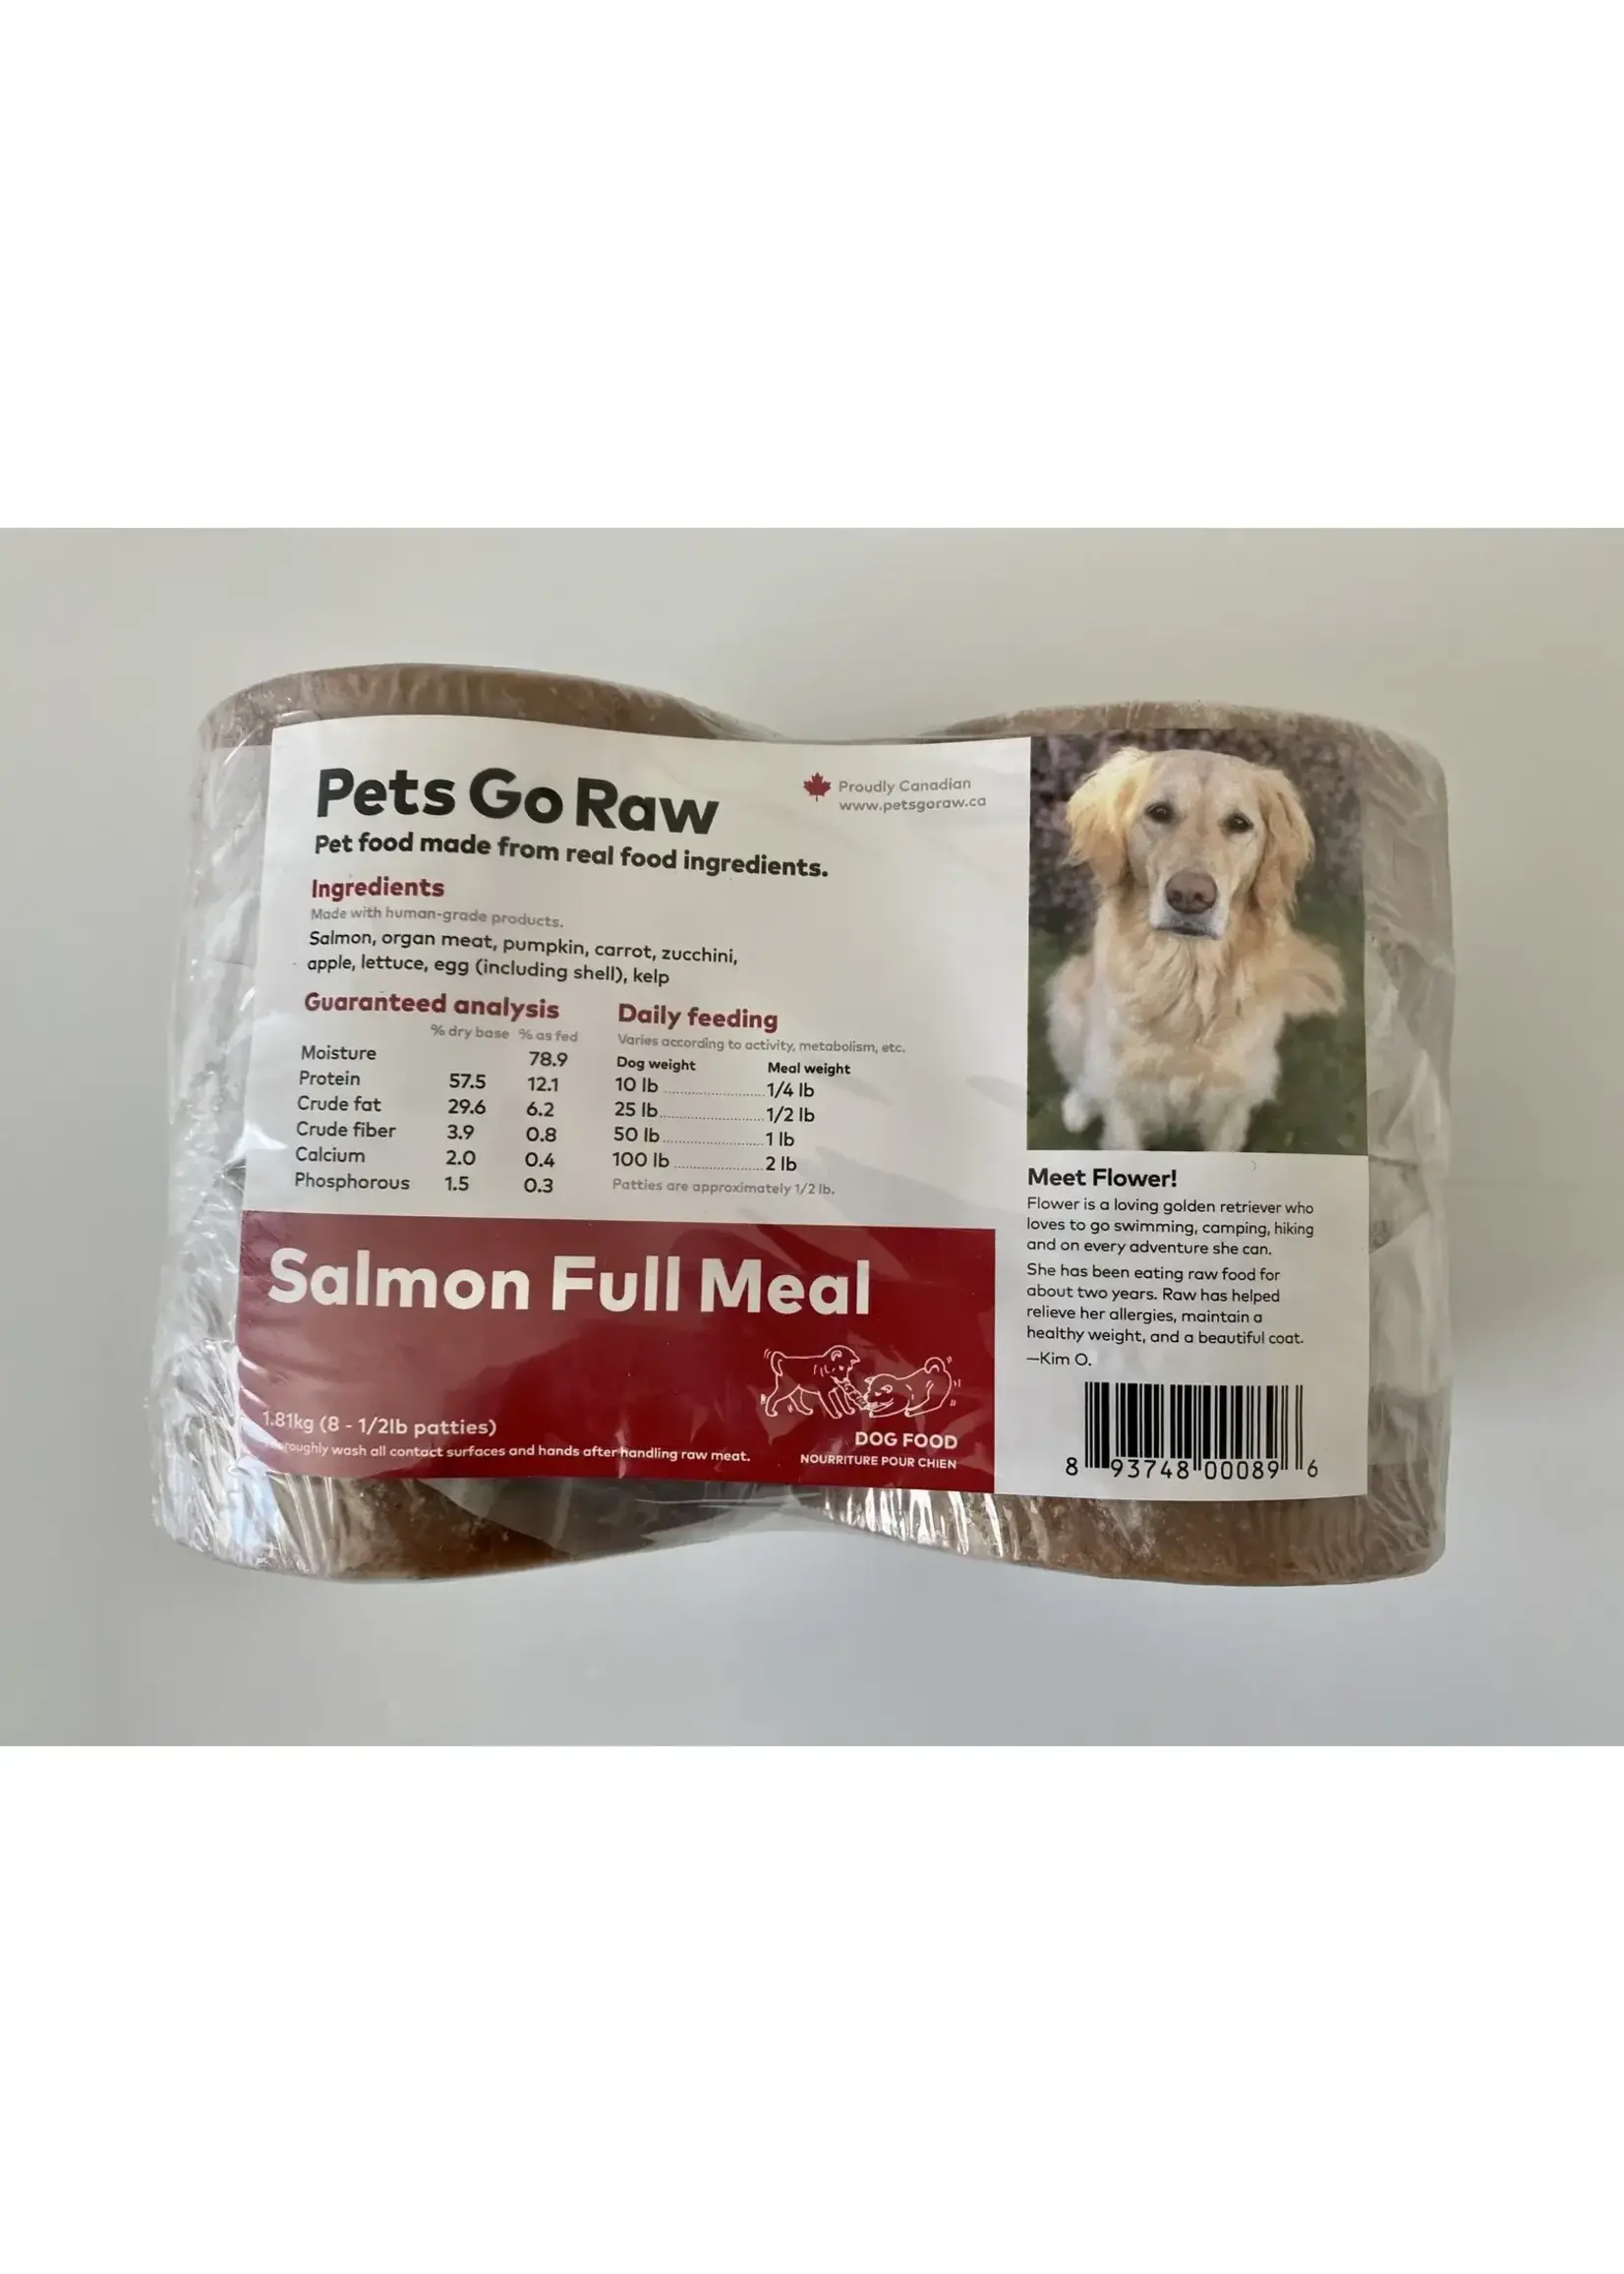 Pets Go Raw Pets Go Raw - Salmon Full Meal Dog